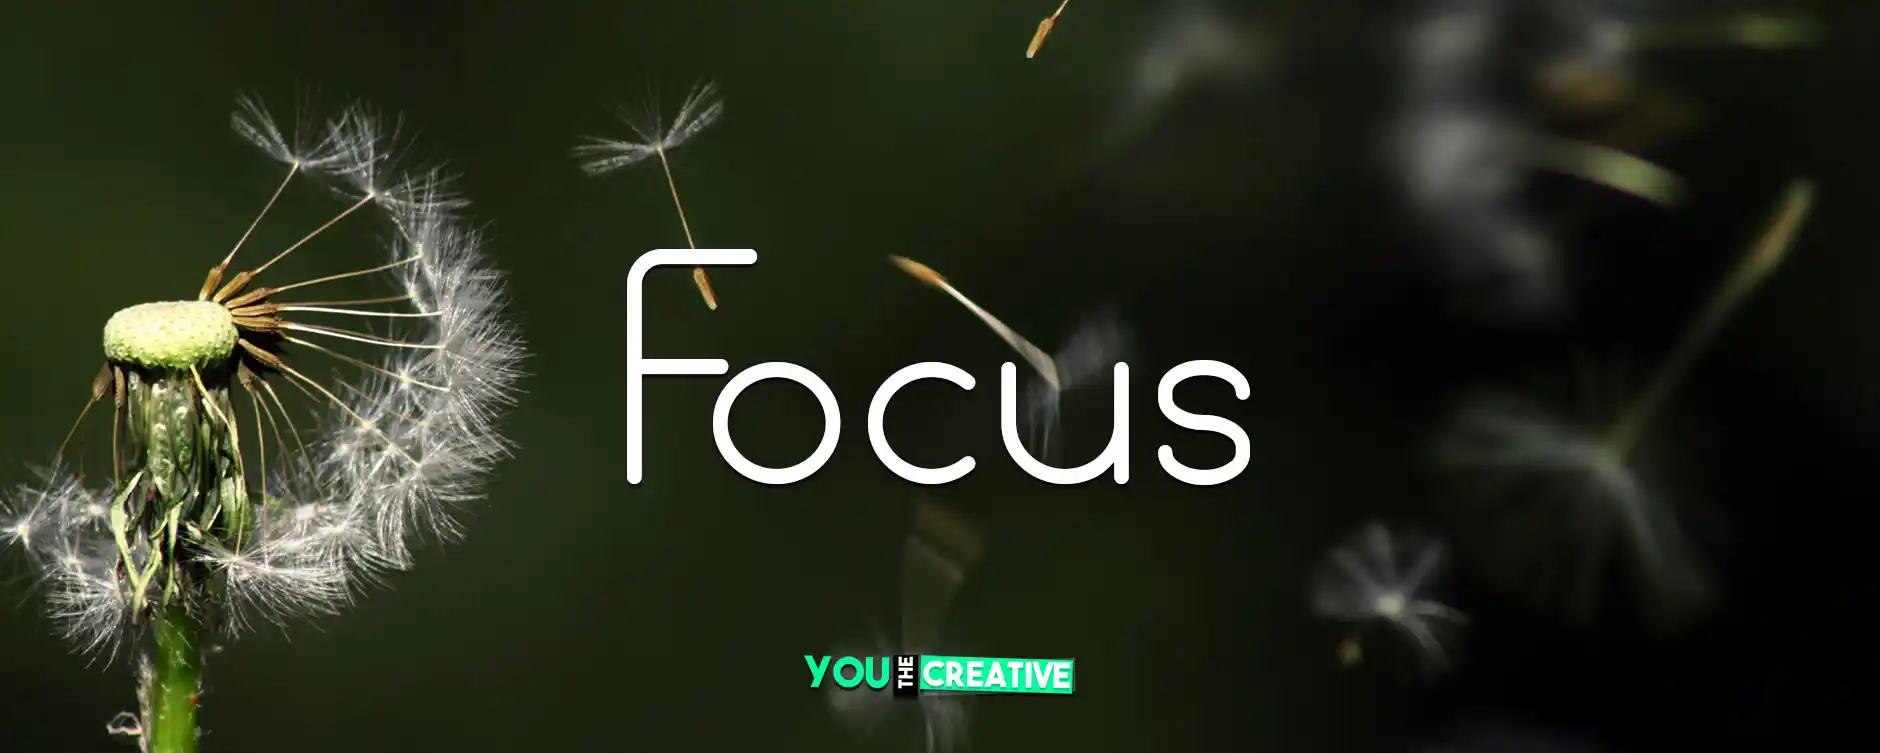 Focus font for you